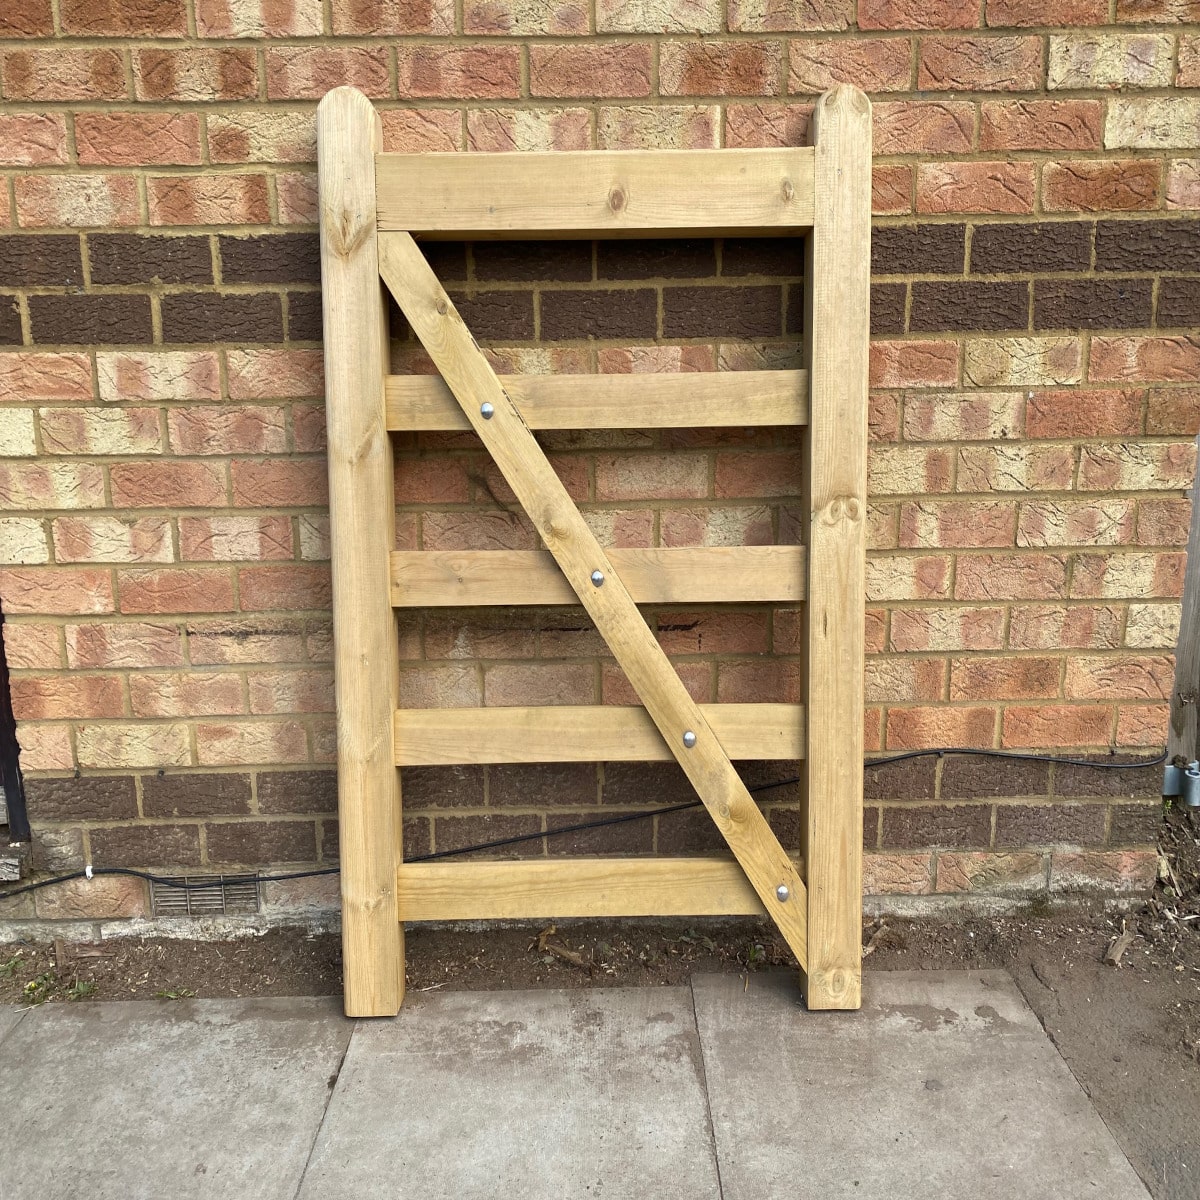 Treated Softwood Field Gate